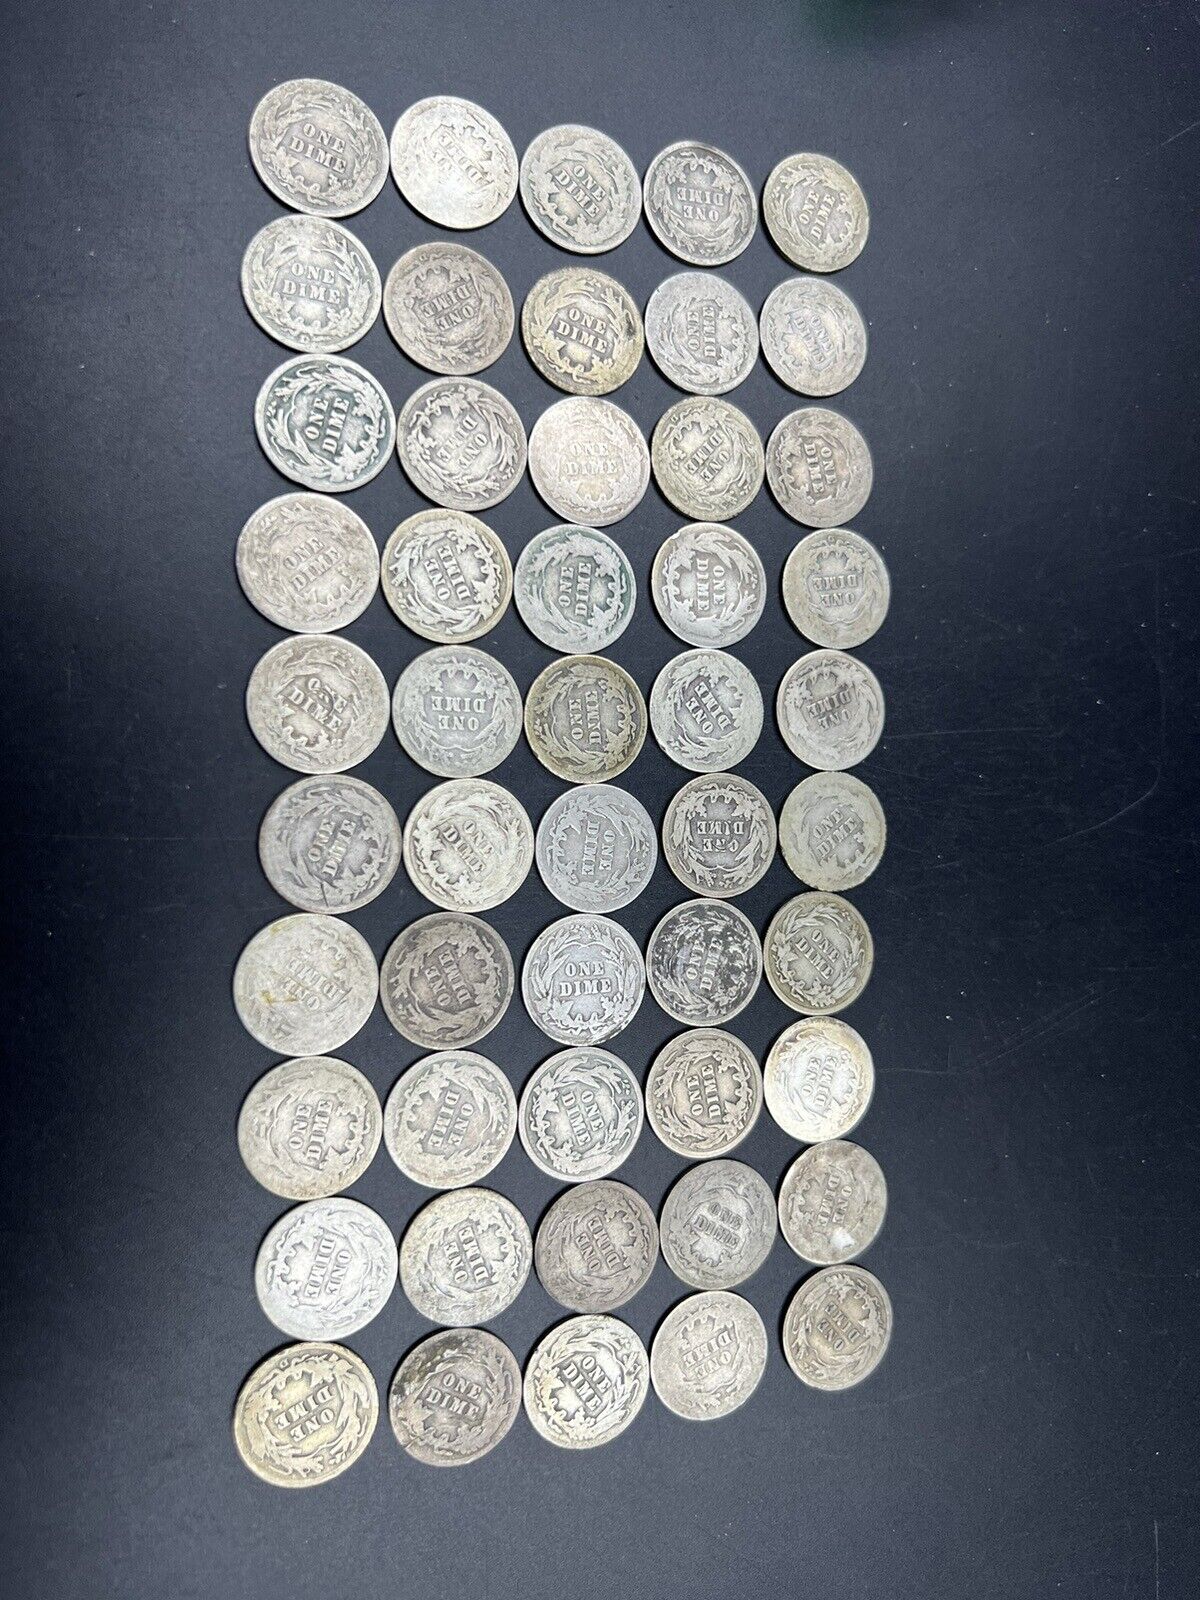 Barber 90% Silver Dimes 50 Coin AG About Good / Good - Very Circ 50 coin Roll #A